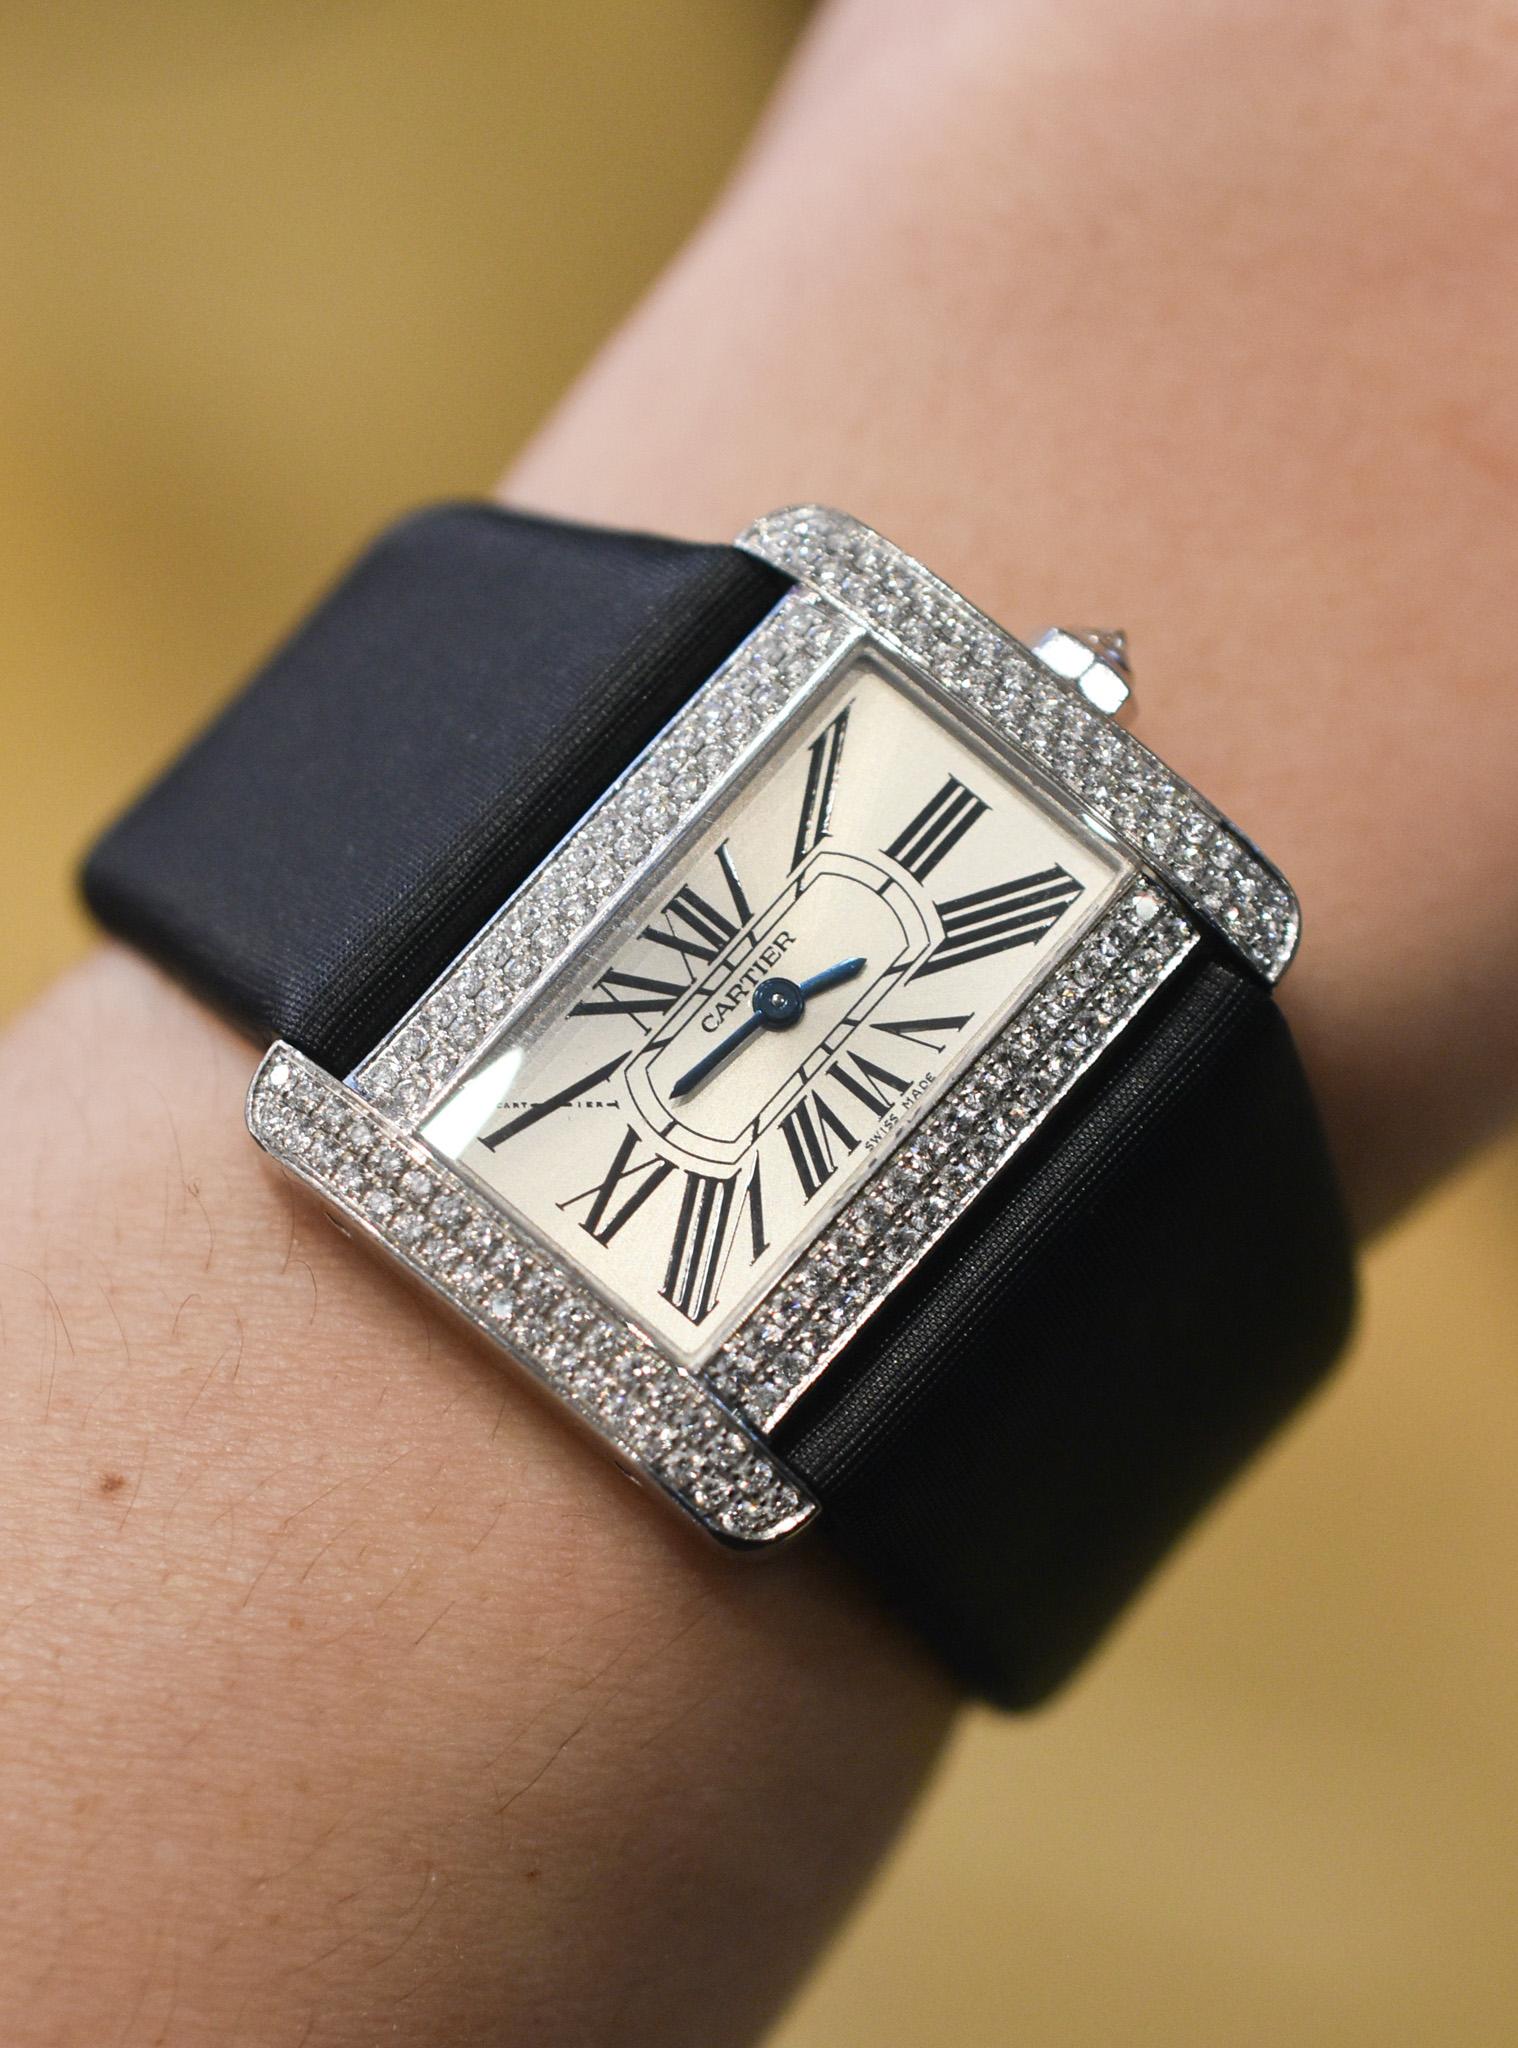 An elegant Cartier Tank Divan Dress Watch Ref. 2613 in 18k White gold with Diamond-set Dial and Roman Numerals. The case measures 31 x 25mm with Original Cartier Leather Strap and Buckle.
Made in France, circa 1990. 